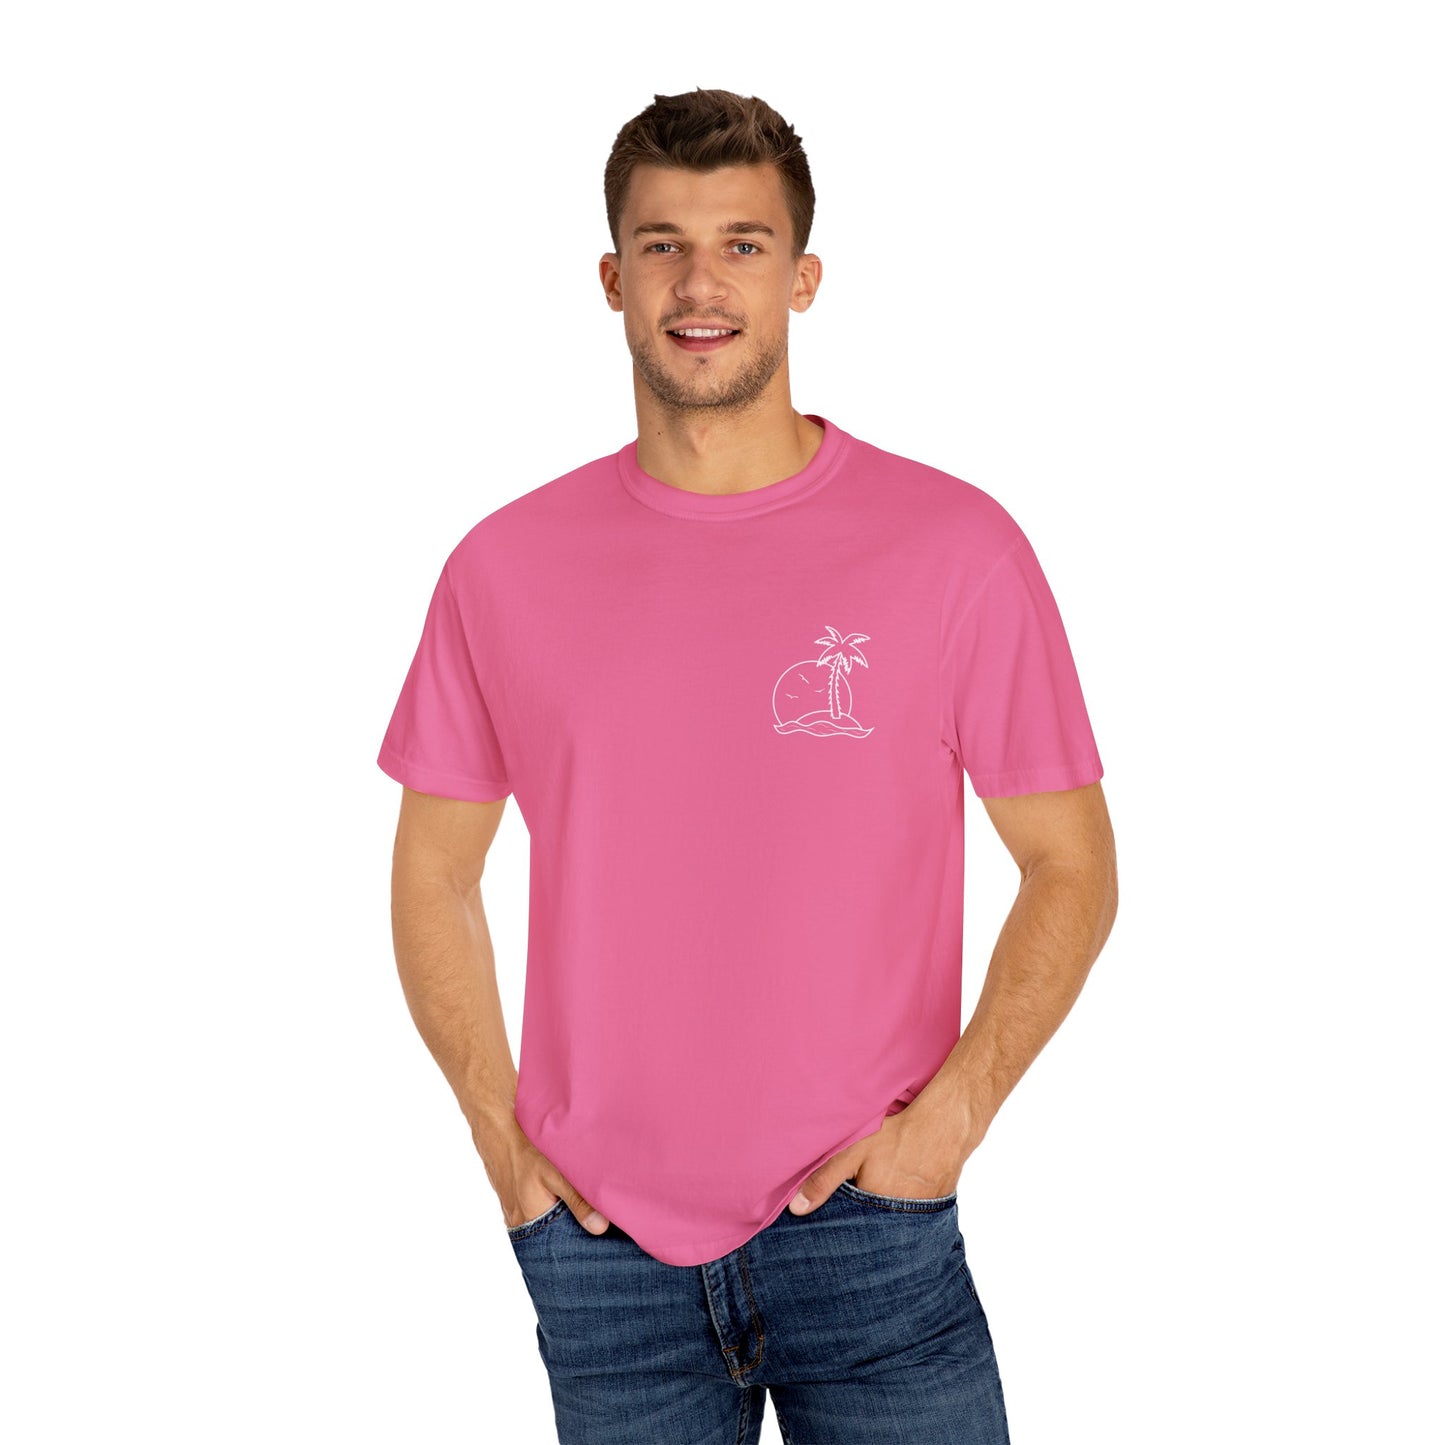 Comfort Colors Chasin Sunsets Unisex Garment-Dyed T-shirt